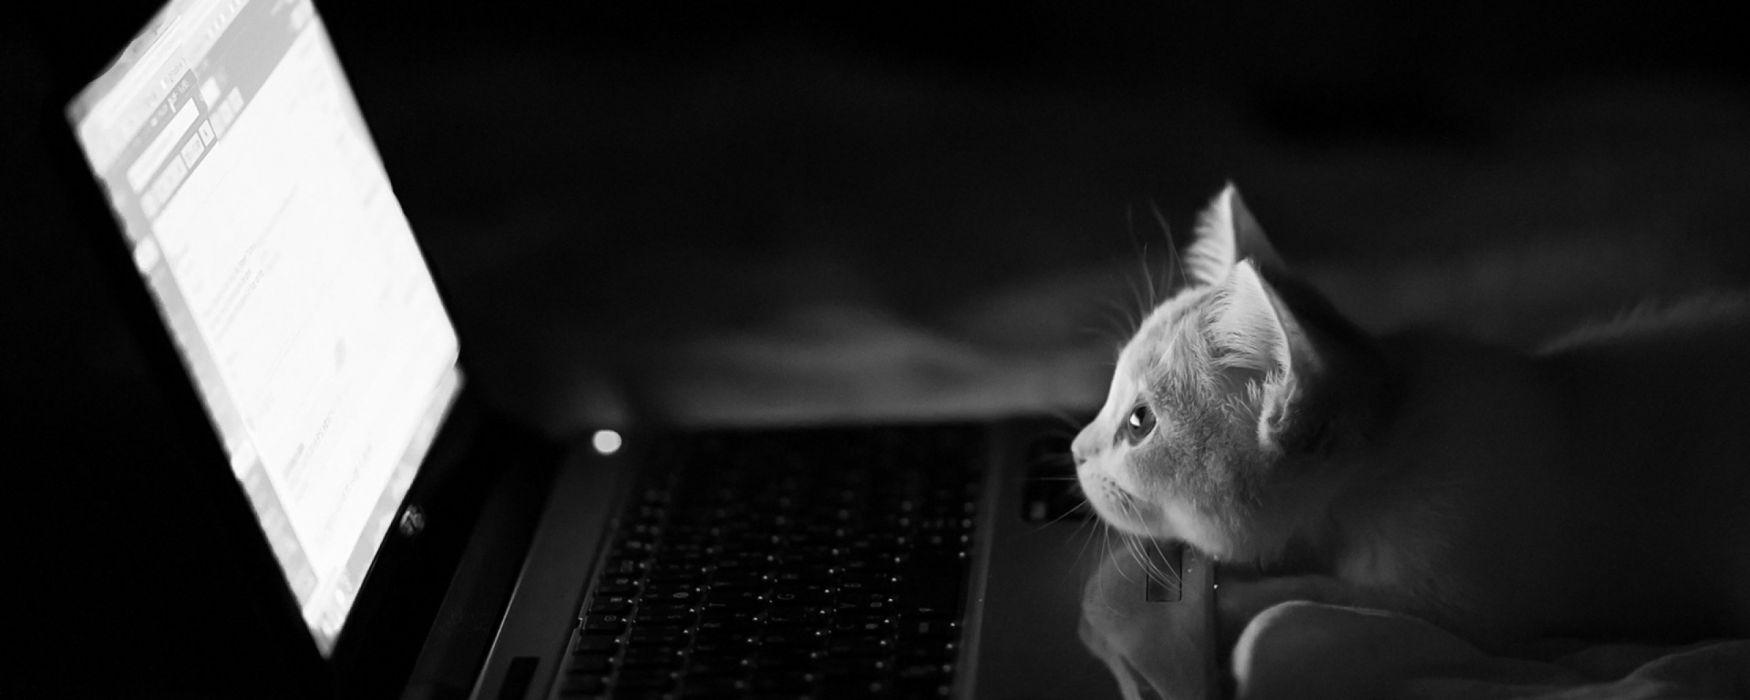 Dual Monitor Cat Wallpapers - Top Free Dual Monitor Cat Backgrounds